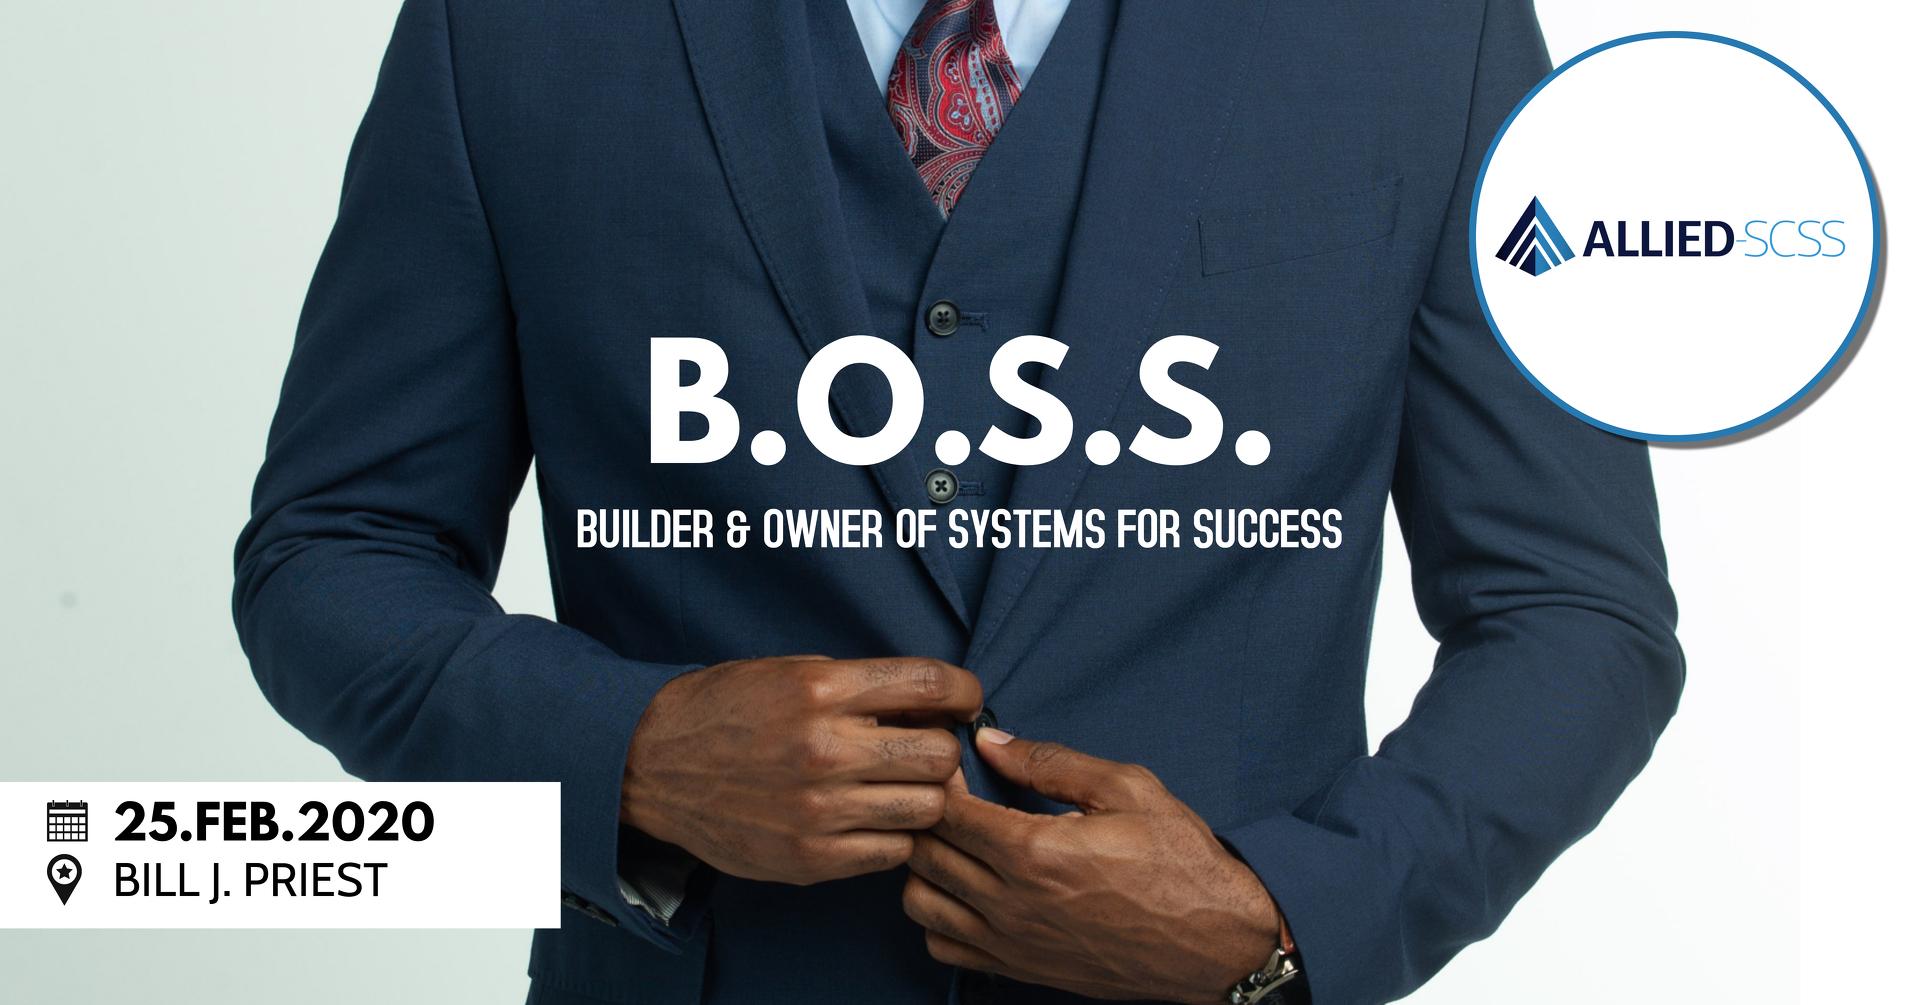 Follow The Blueprint Series: How To Be A B.O.S.S.